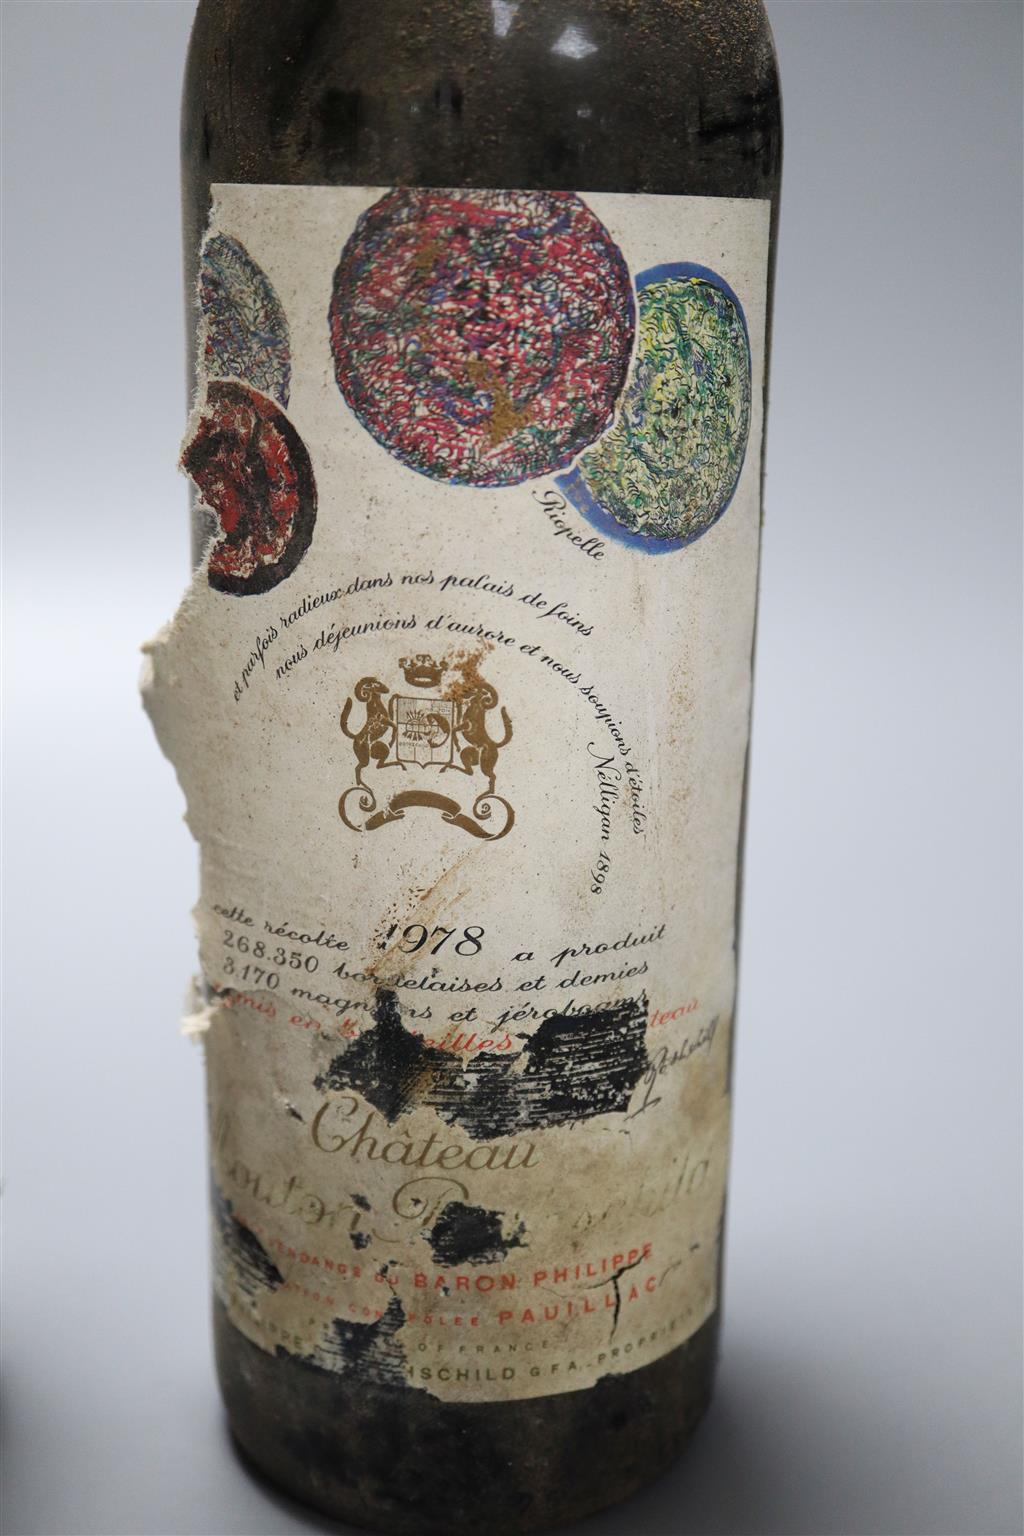 A bottle of Chateau Mouton Rothschild Pauillac 1978 and a bottle of Crozes Hermitage 1979